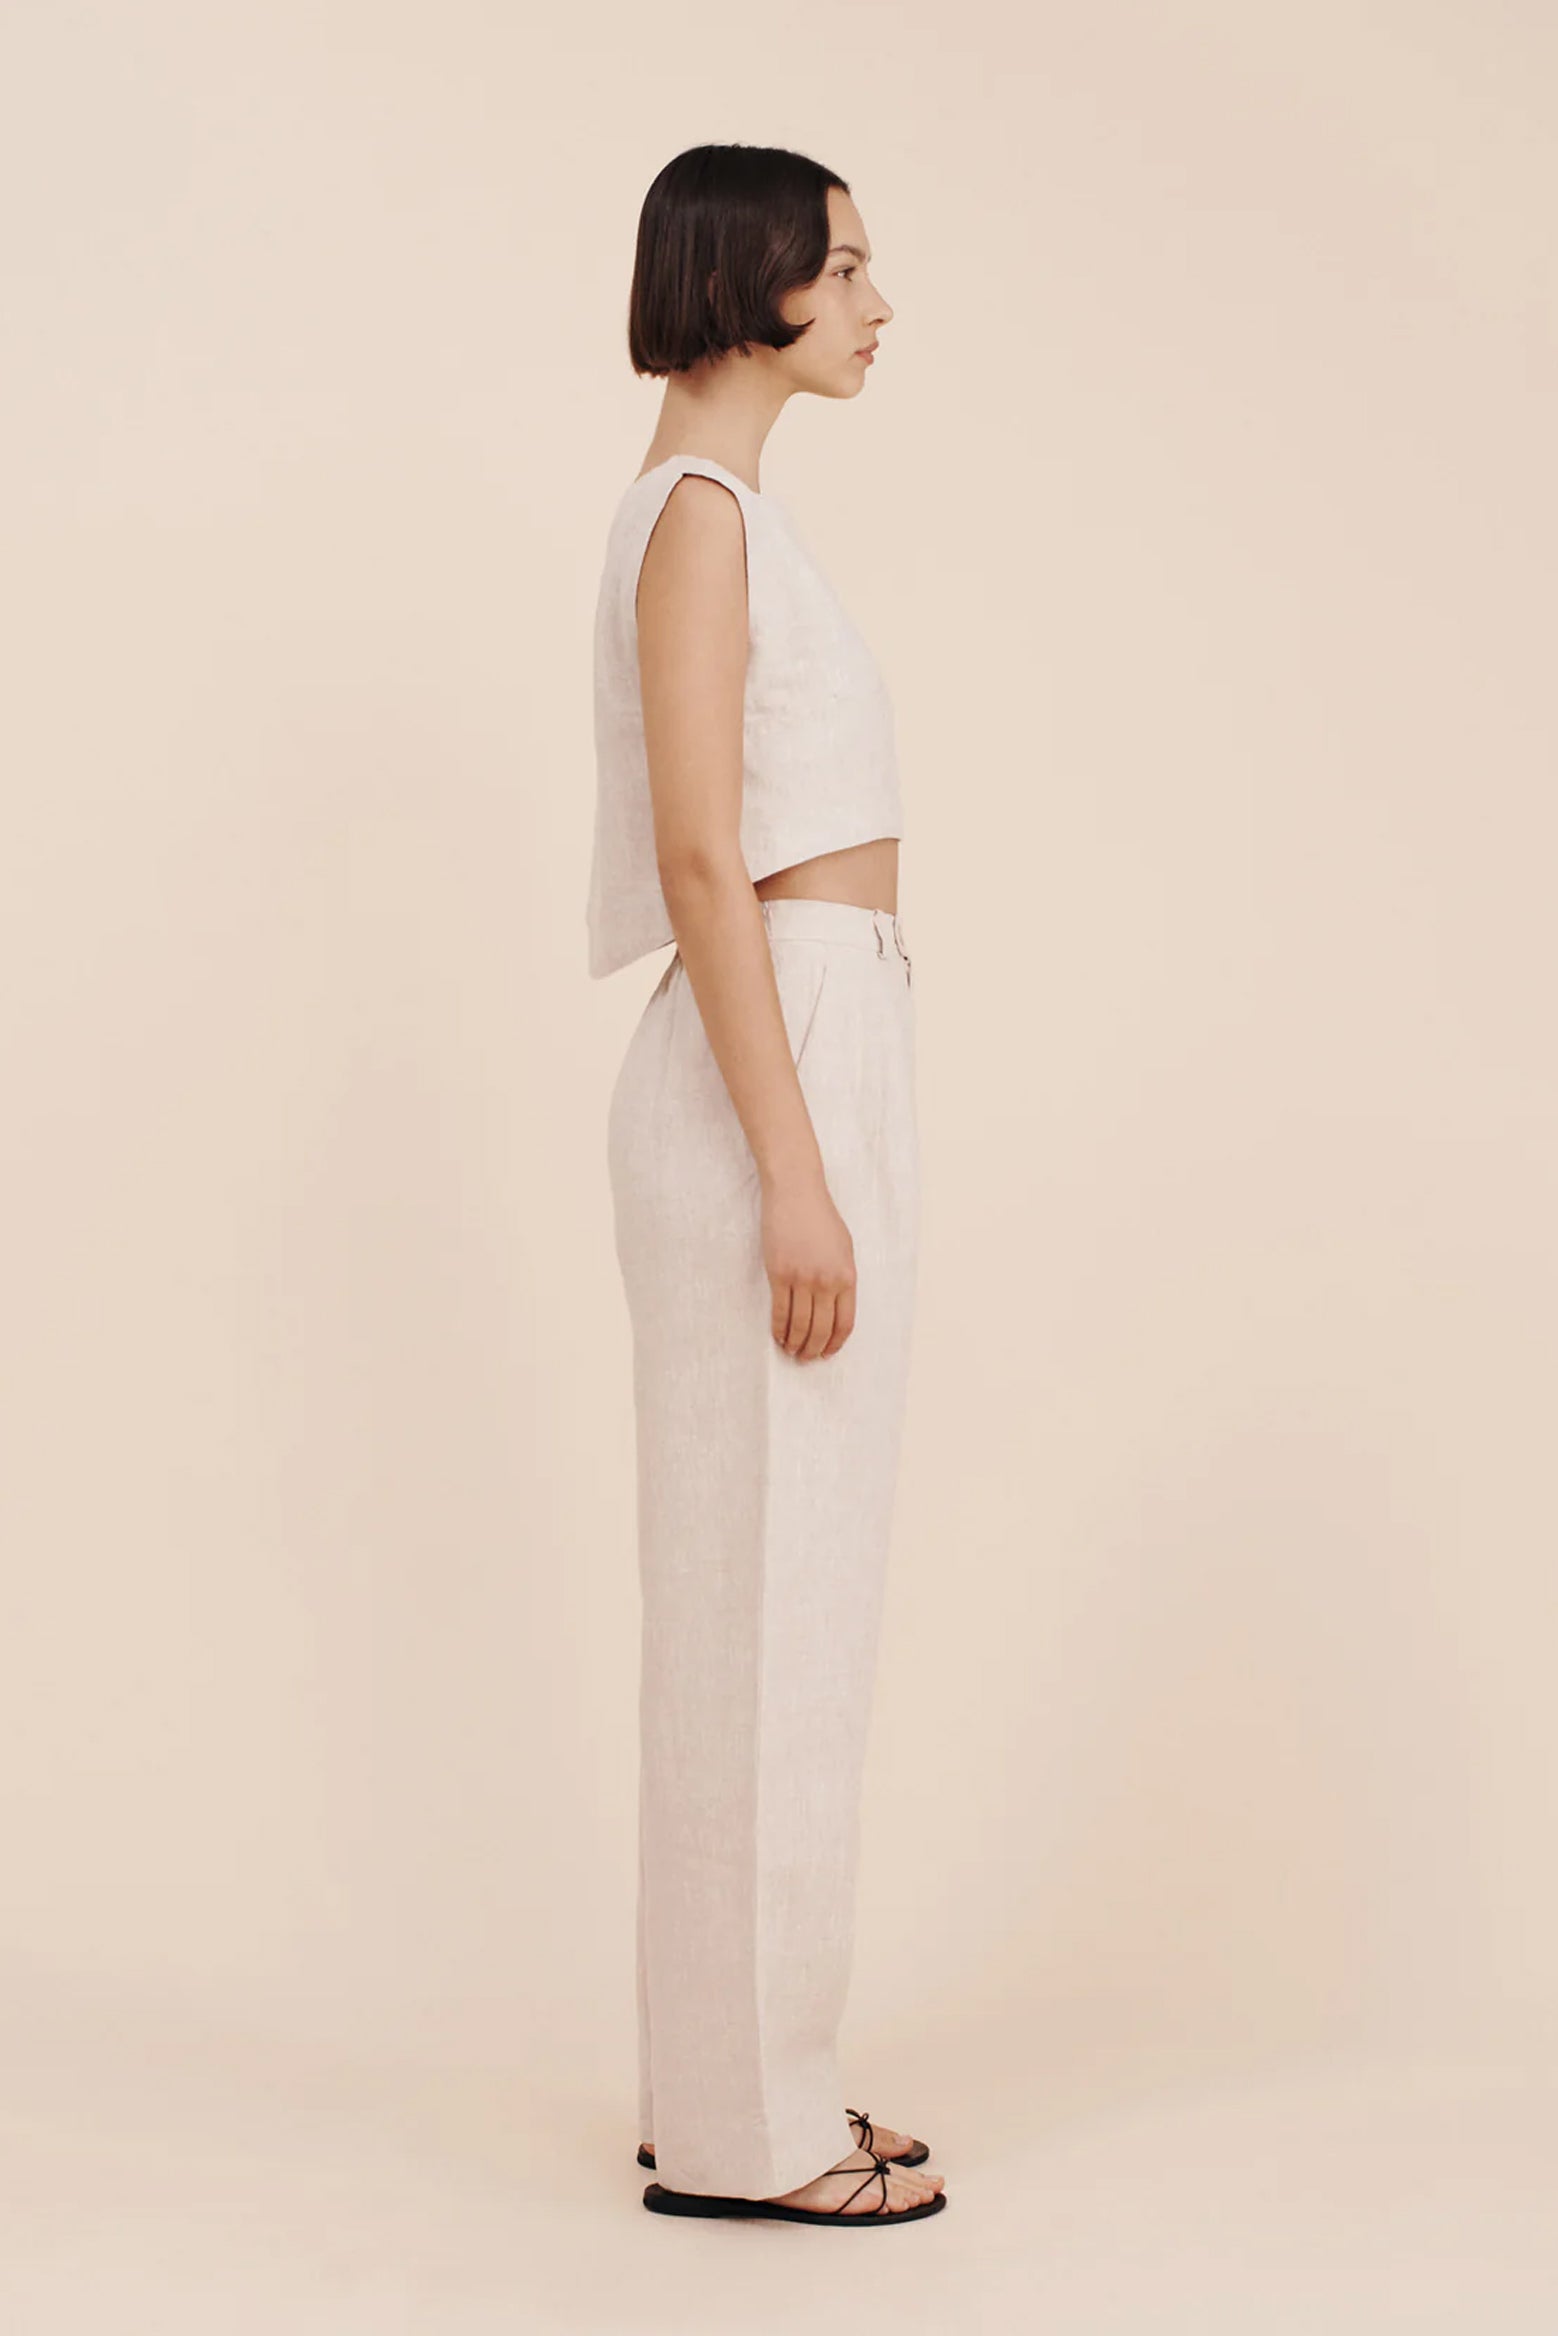 Posse Louis Trouser in Natural available at The New Trend Australia.